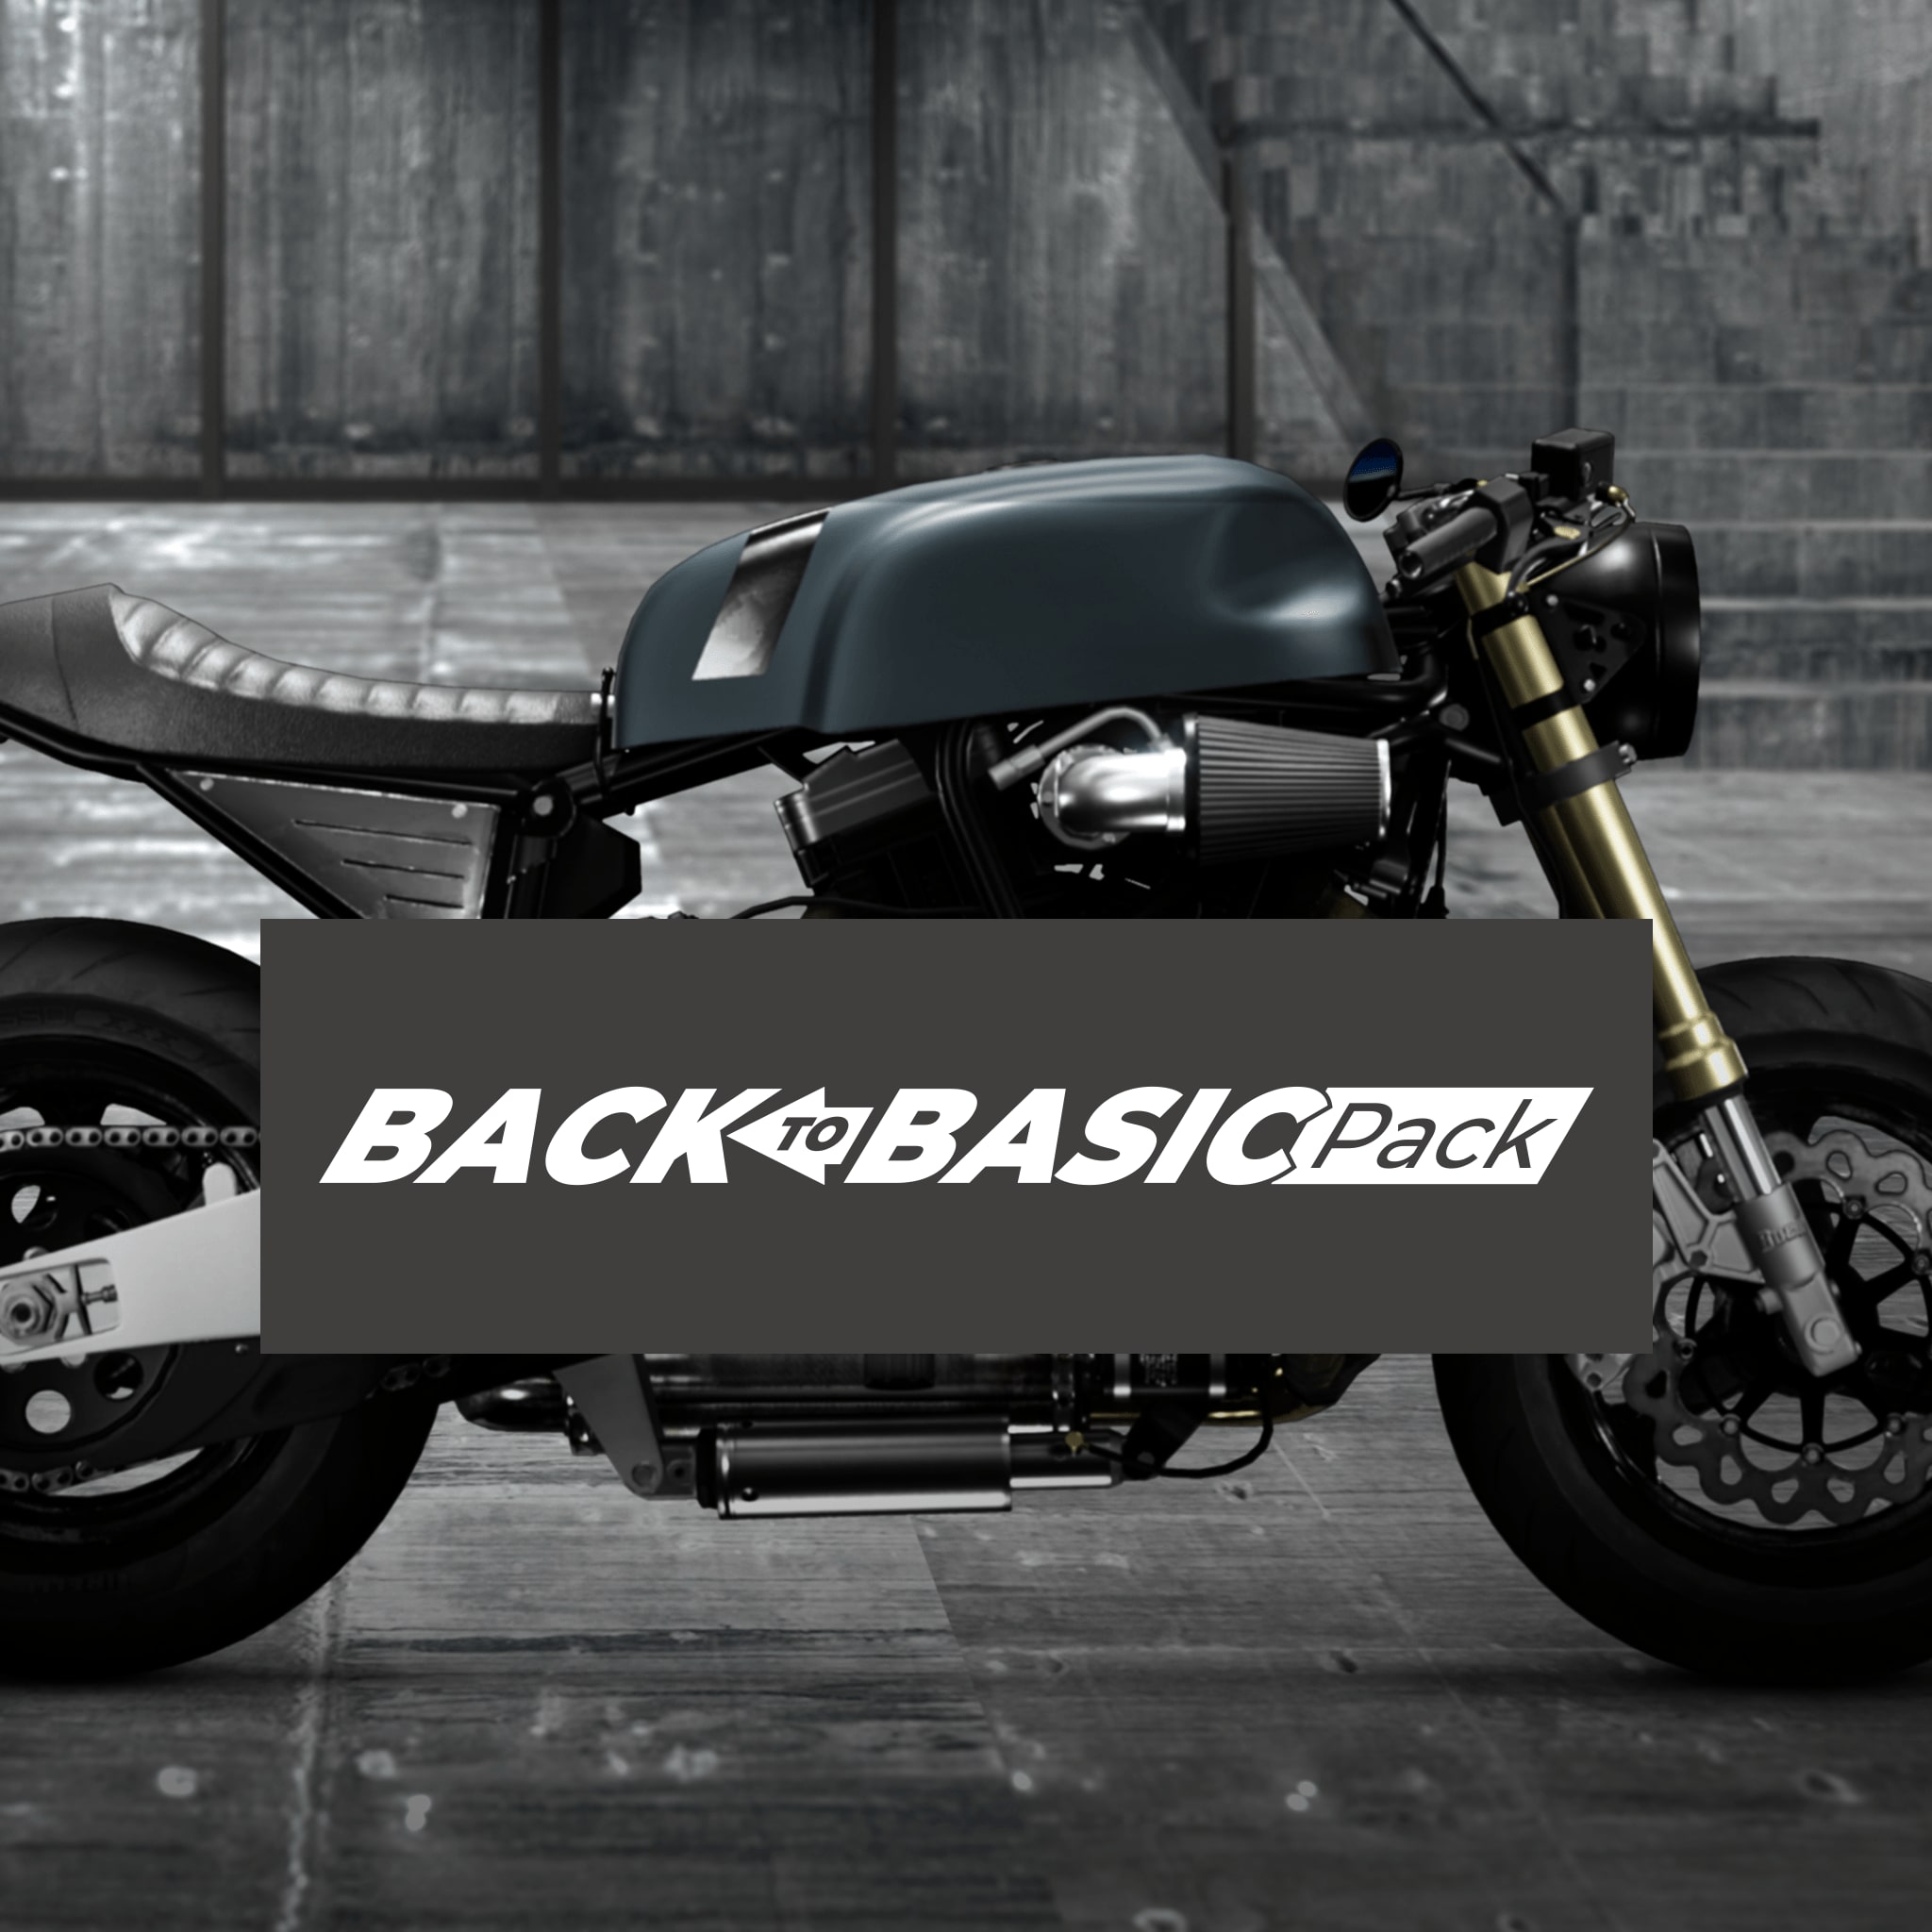 RIDE 3 - Back to Basic Pack